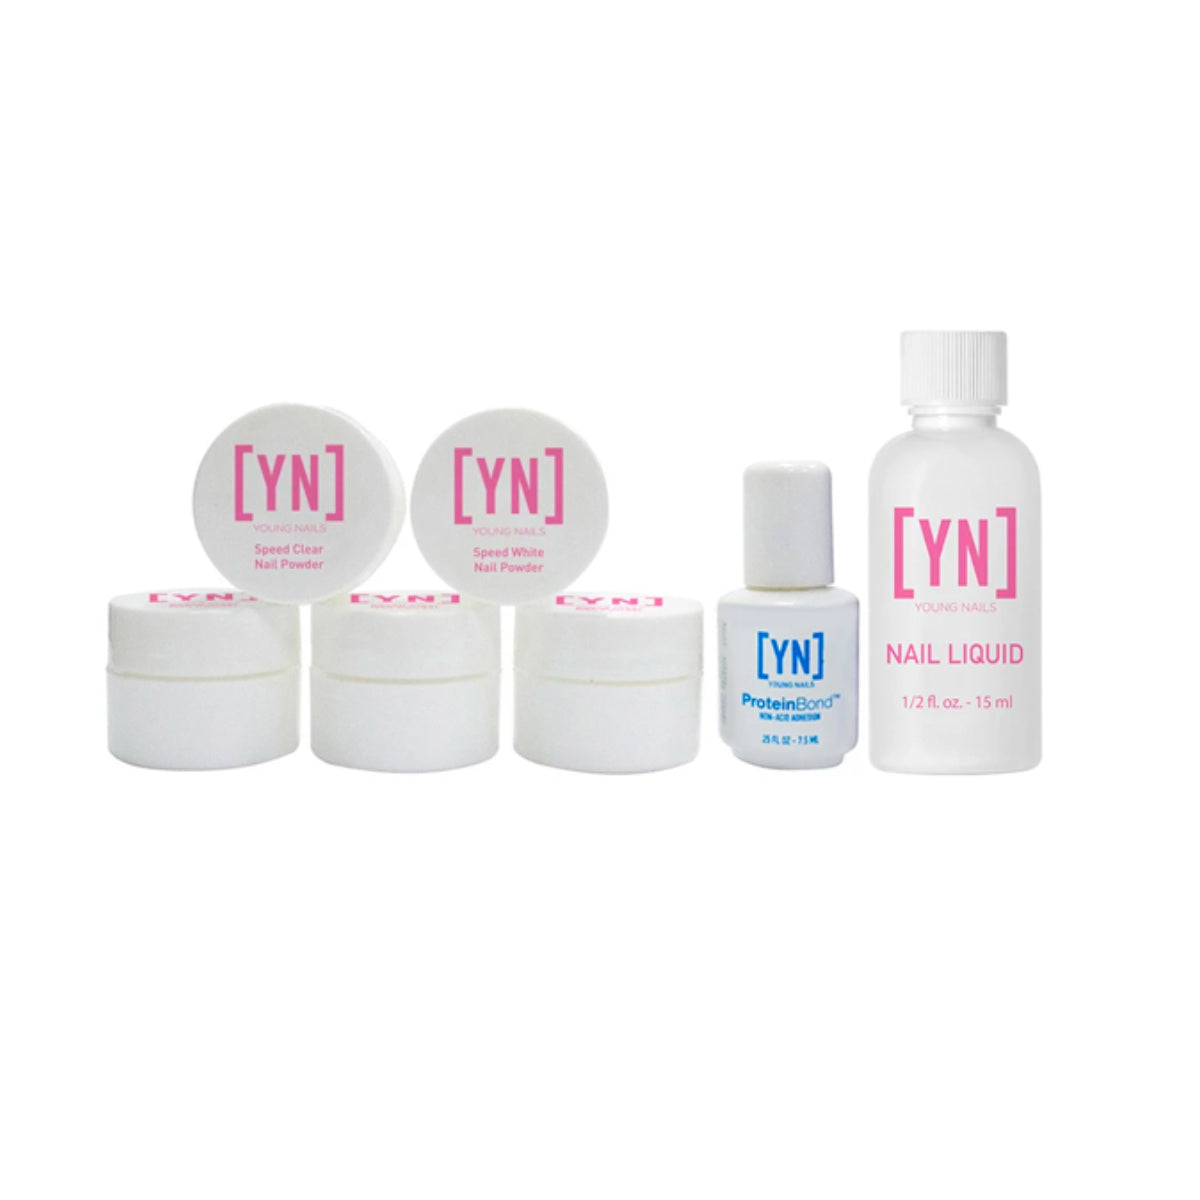 Young Nails Products are selling includes Liquid, Swipe, Monomer, Acrylic Powder, Young Nails Protein Bond .... Core and Cover Nail Powder are created with exact particle blend technology that gives you flawless consistency and superior adhesion